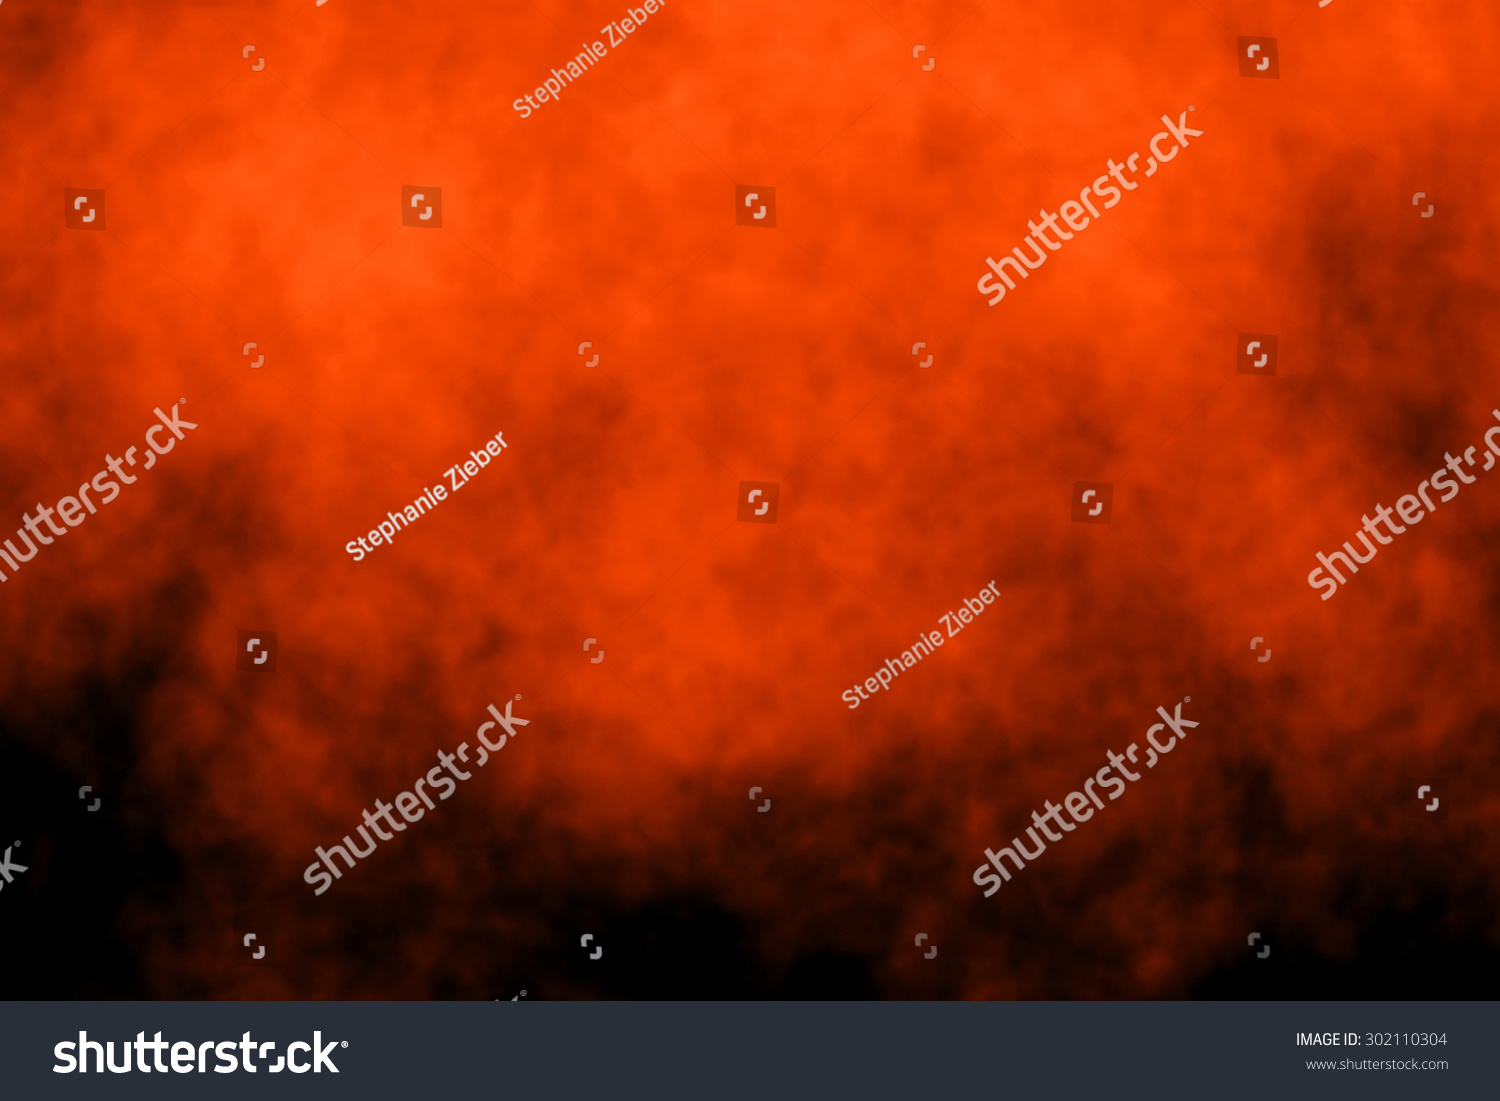 Abstract Halloween background #302110304